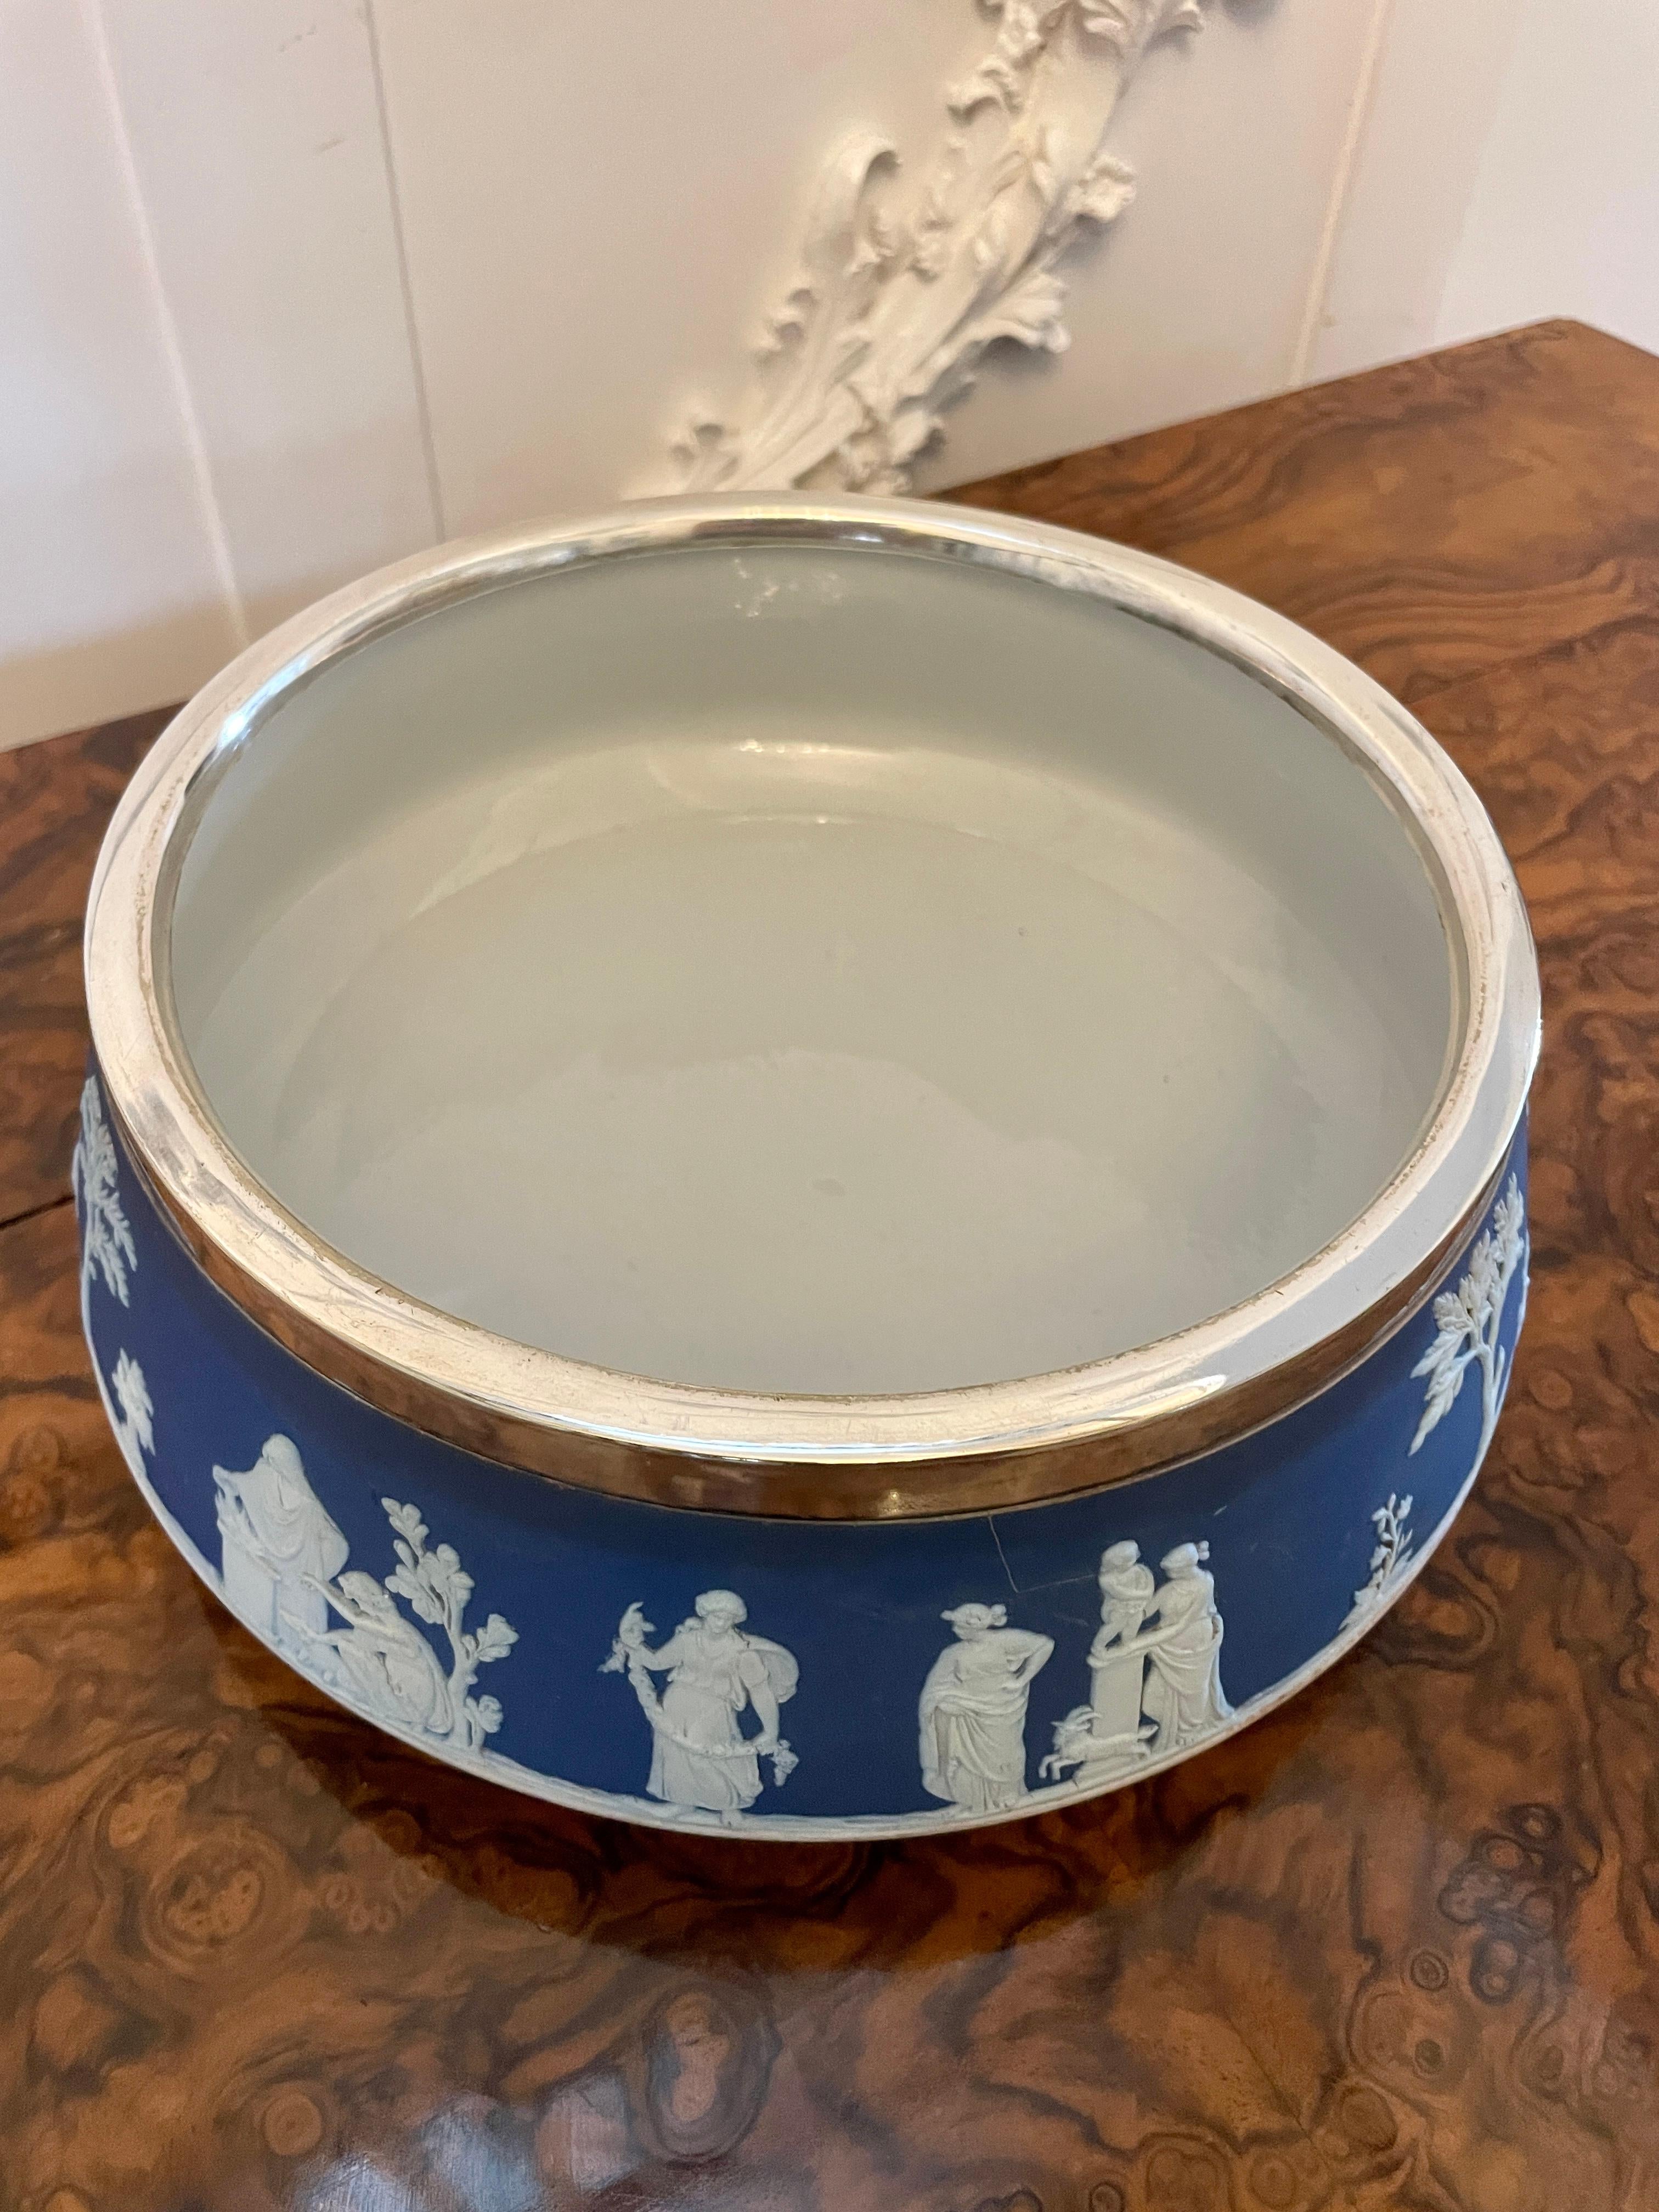 Antique Edwardian quality Wedgwood Jasperware fruit bowl having traditional decoration in wonderful blue and white colours with a circular silver plated rim 


In perfect original condition


Dimensions:
Height 9 cm (3.54 in)
Width 24 cm (9.44